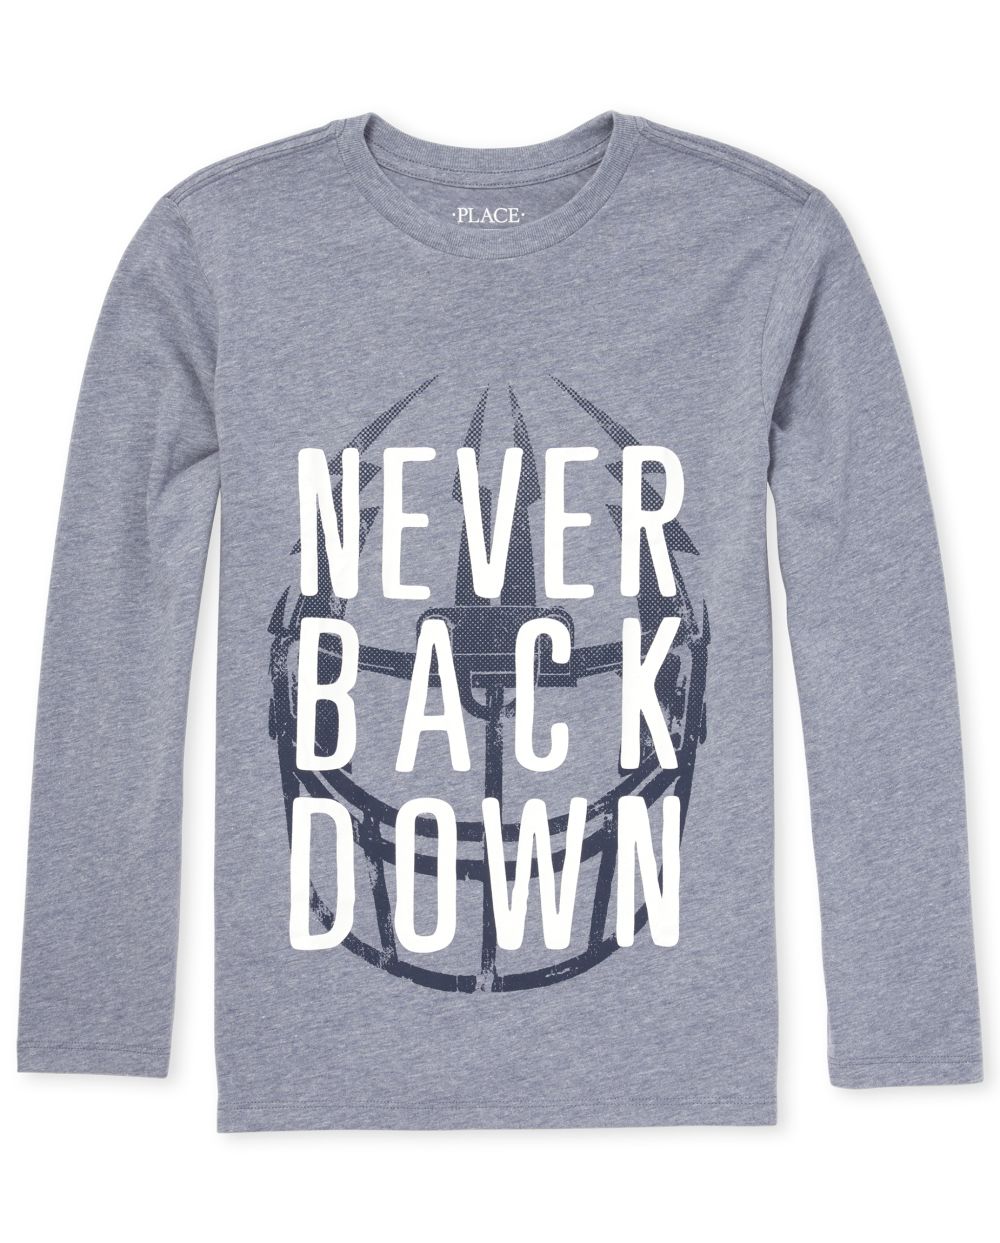 Boys Never Back Down Graphic Tee